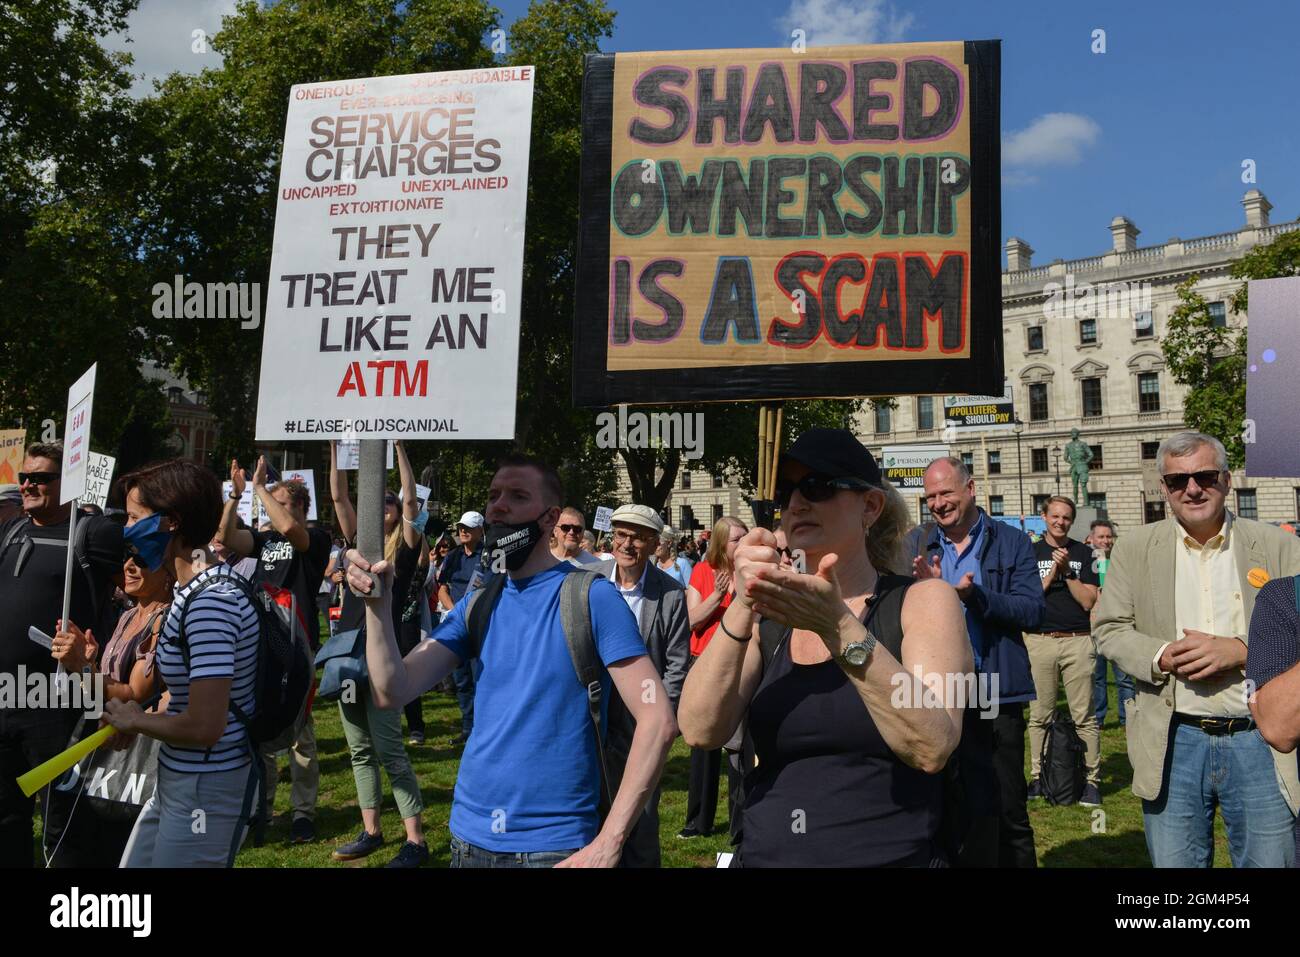 London, UK. 16th Sep, 2021. Protesters are seen holding placards at a Leaseholders Together Rally in Parliament Square, during the demonstration.The protest was organized by End Our Cladding Scandal campaign with the National Leasehold Campaign. People protested about restrictions to leasehold rights and cladding crisis issues. (Photo by Thomas Krych/SOPA Images/Sipa USA) Credit: Sipa USA/Alamy Live News Stock Photo